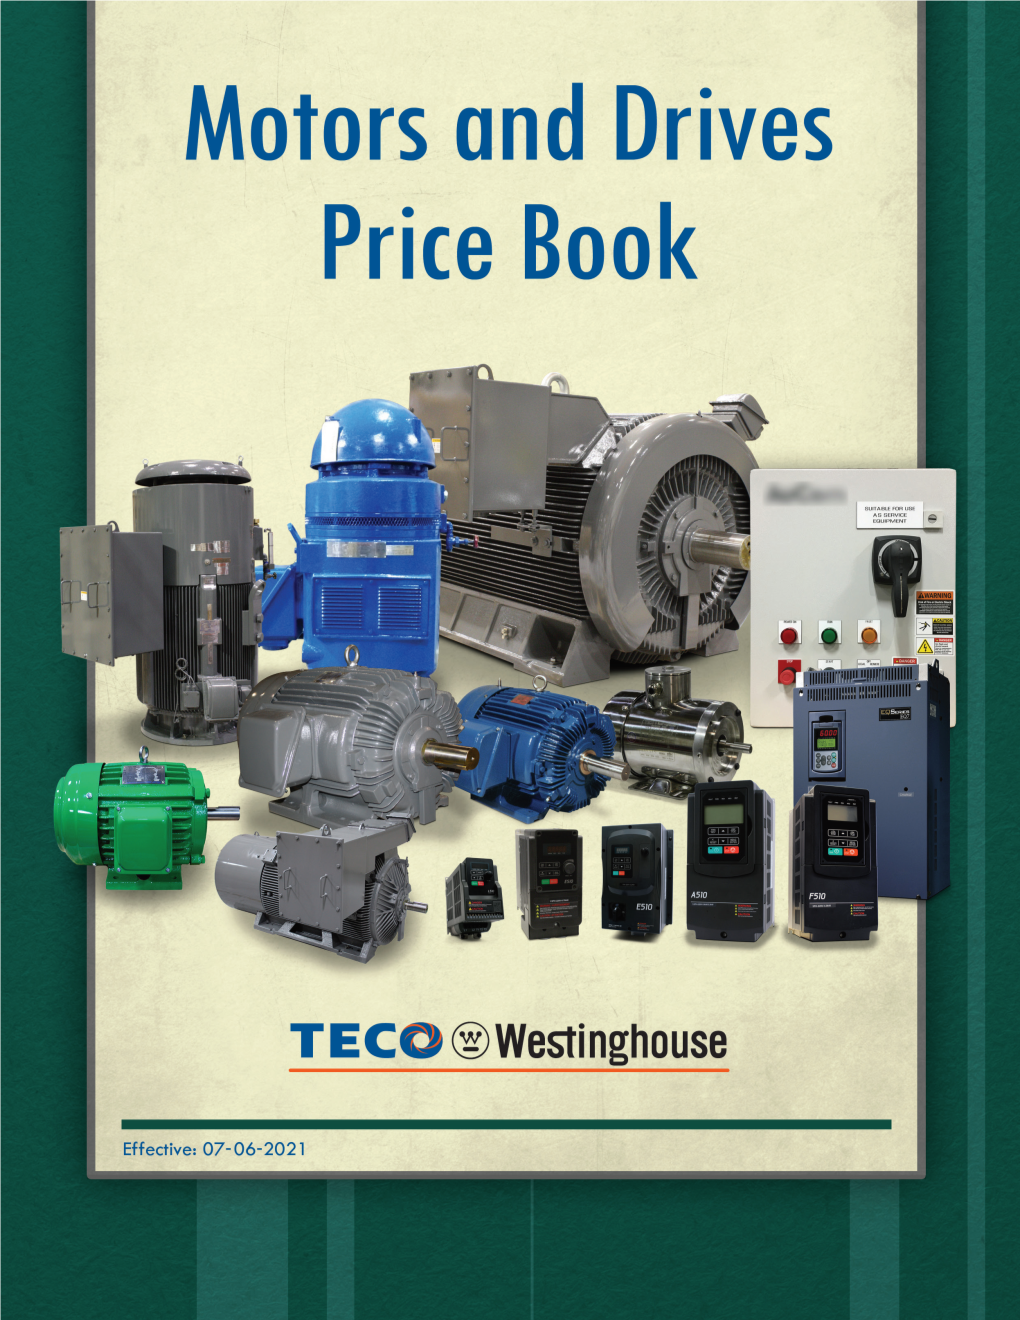 Motor and Drives Price Book